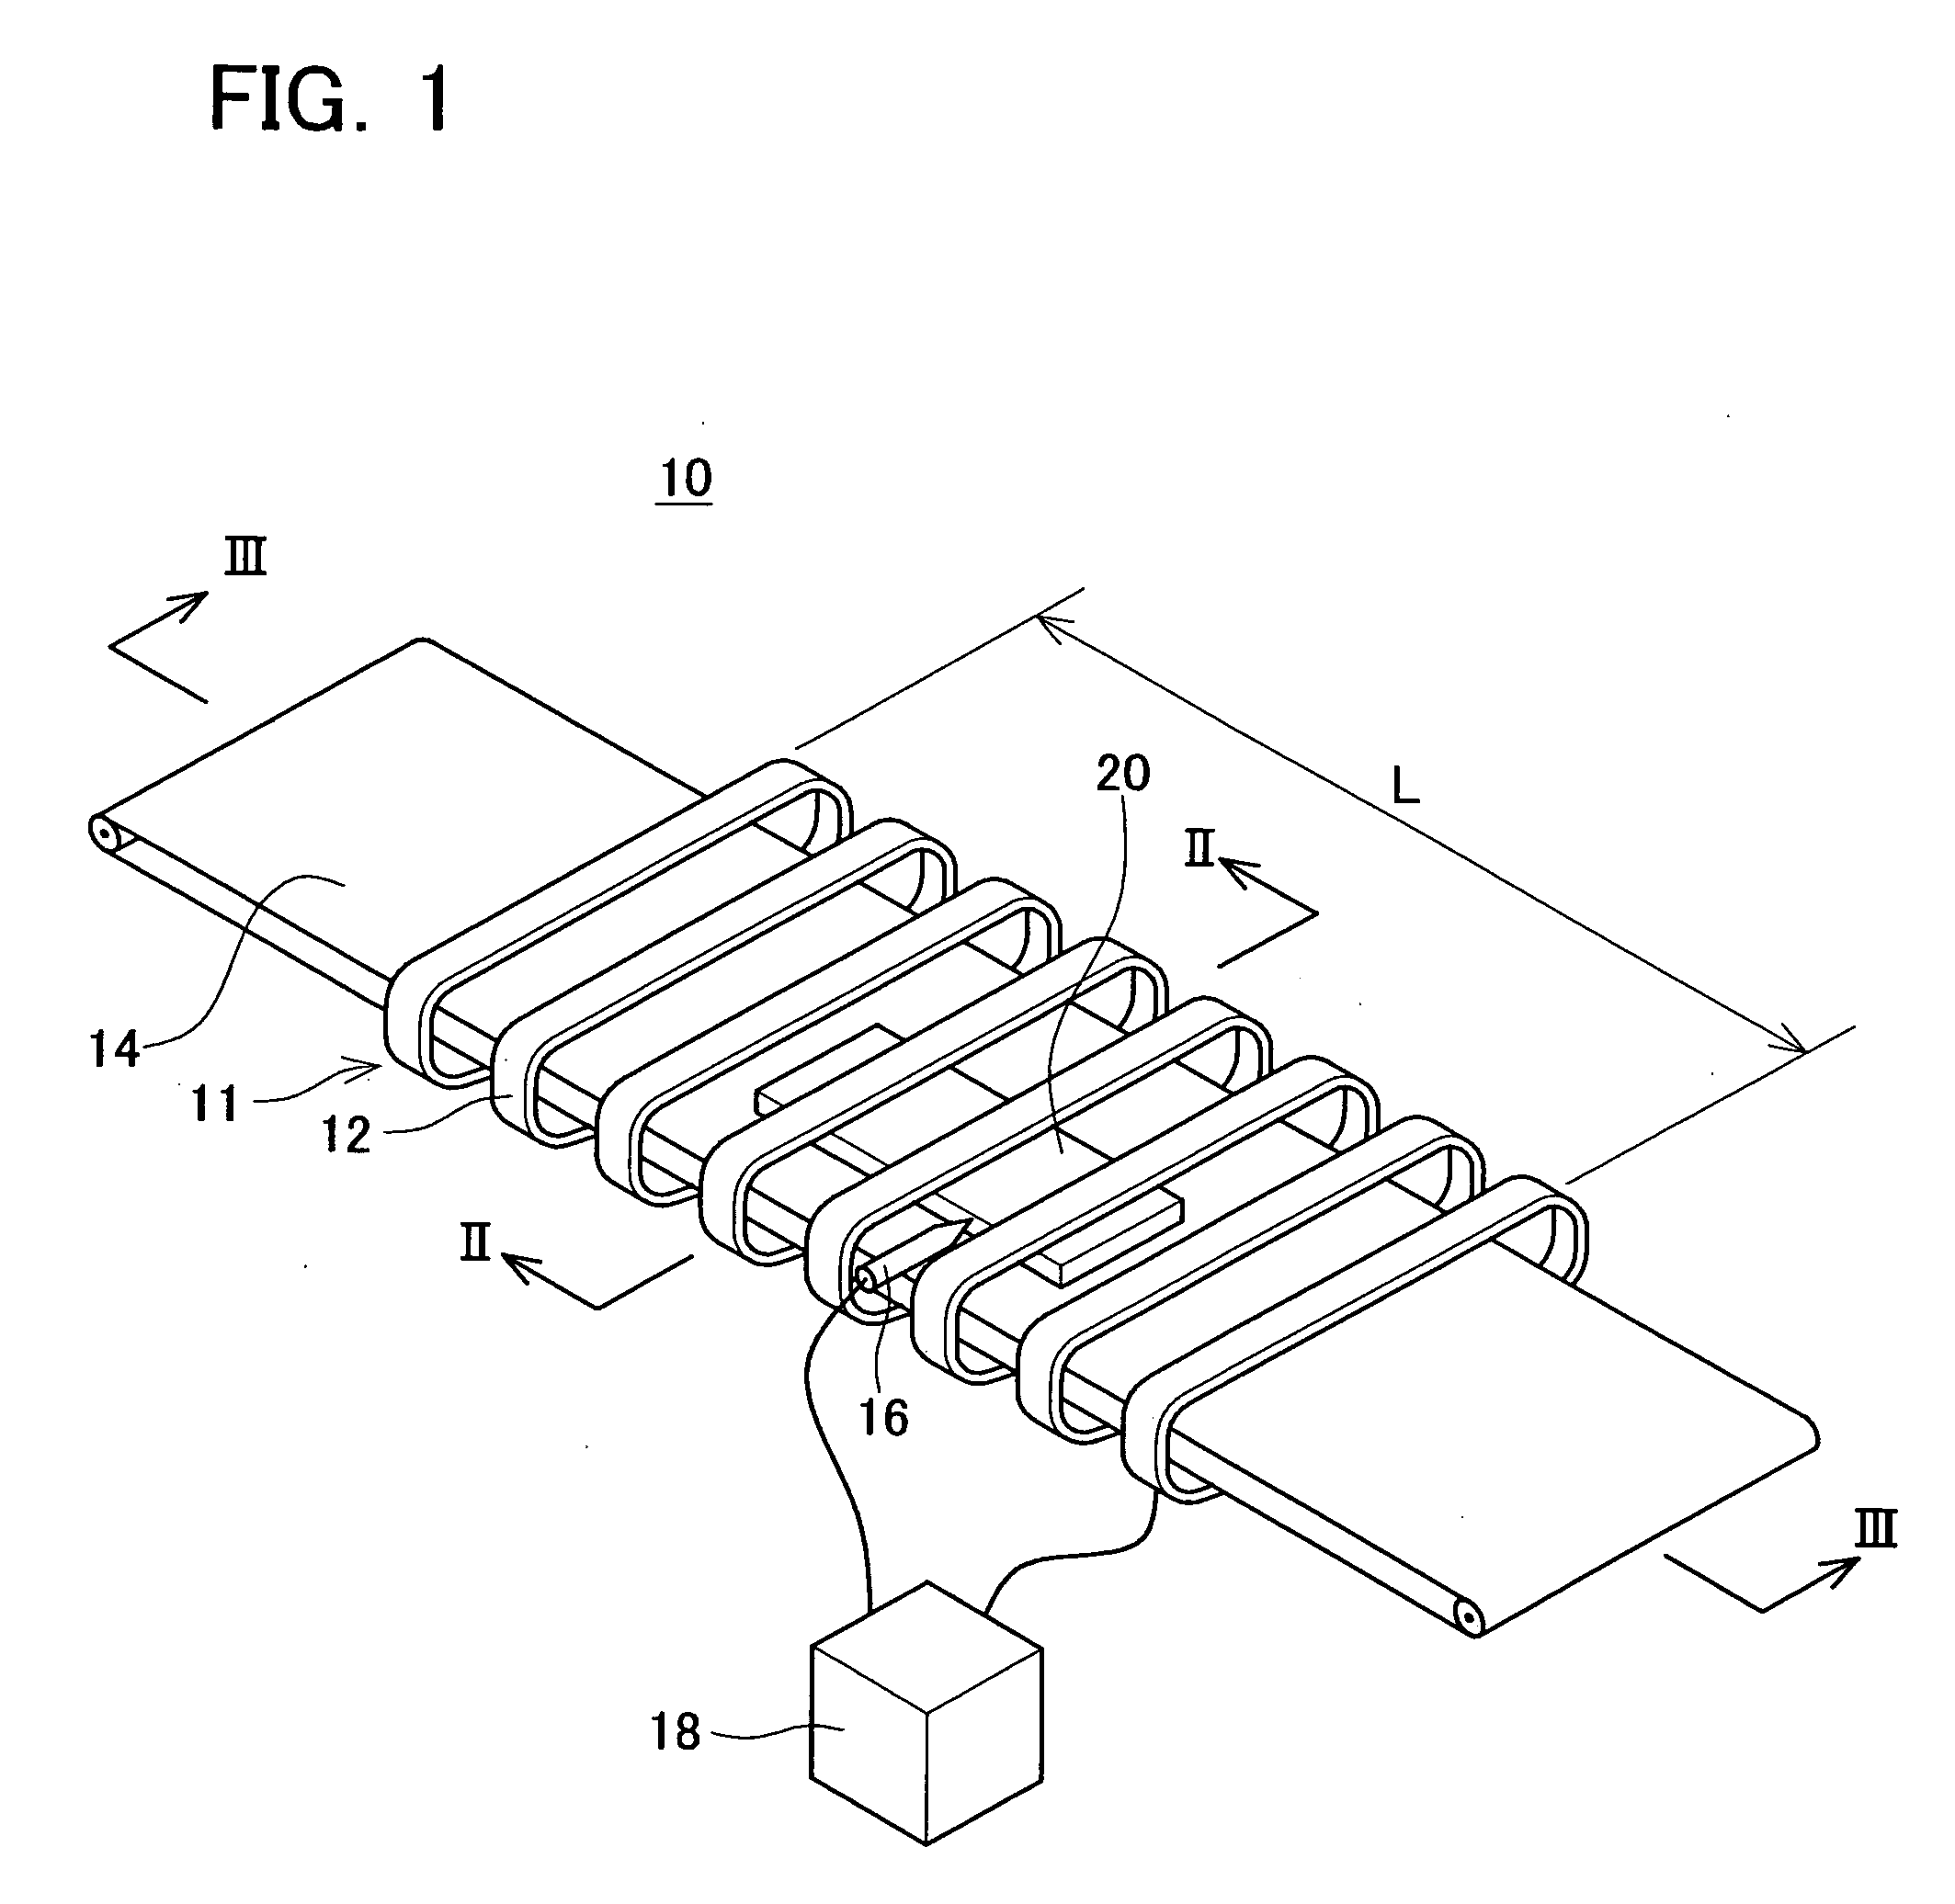 Apparatus and a method of soldering a part to a board